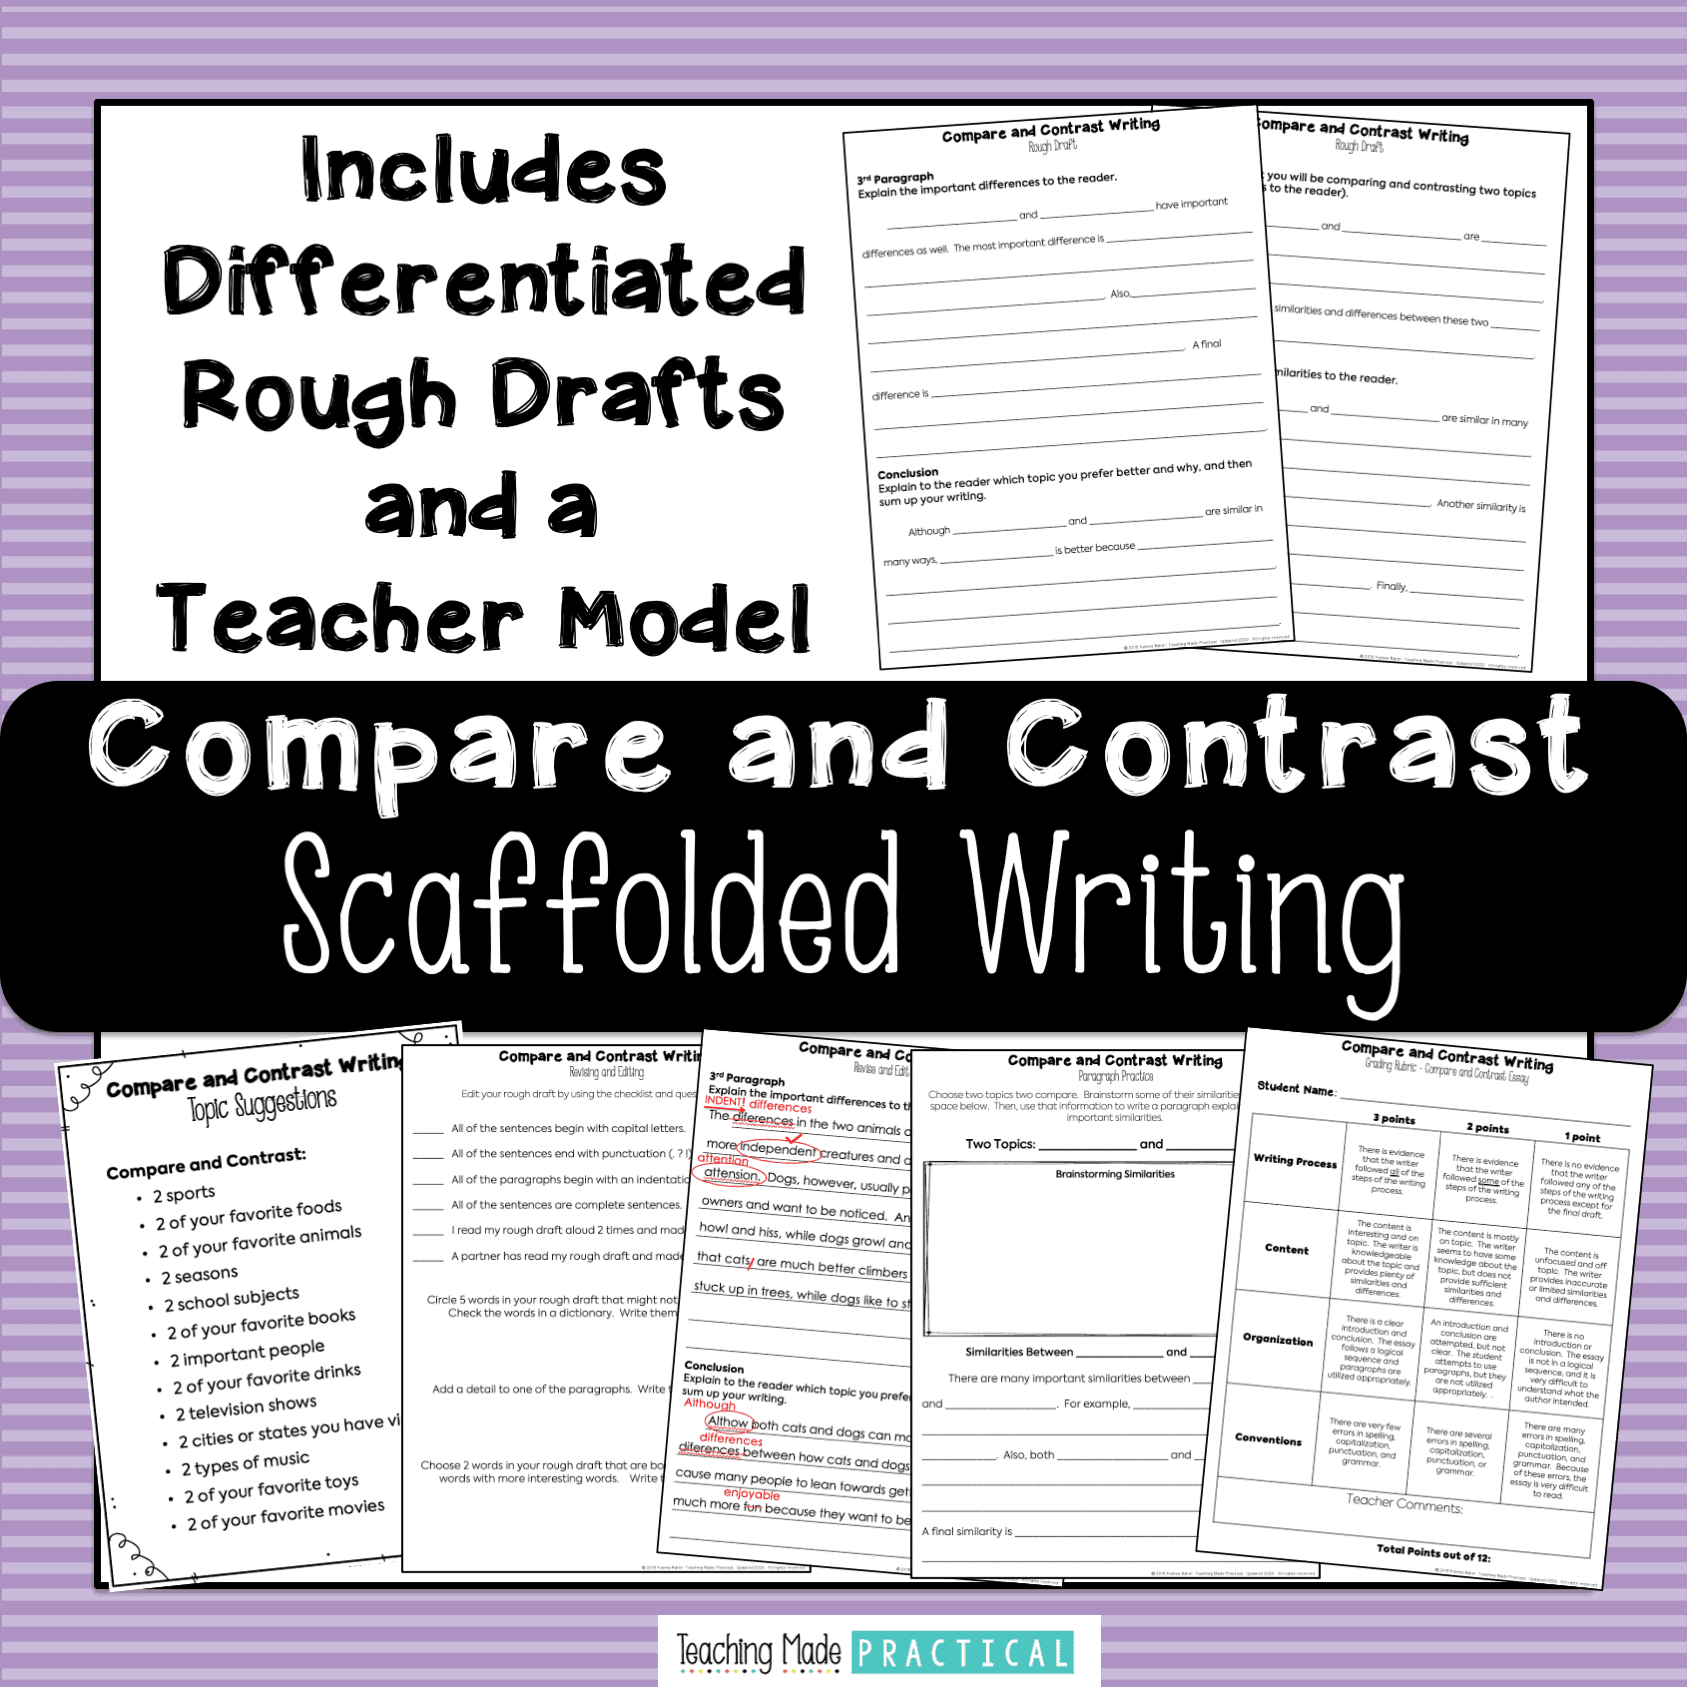 how to structure a compare and contrast essay